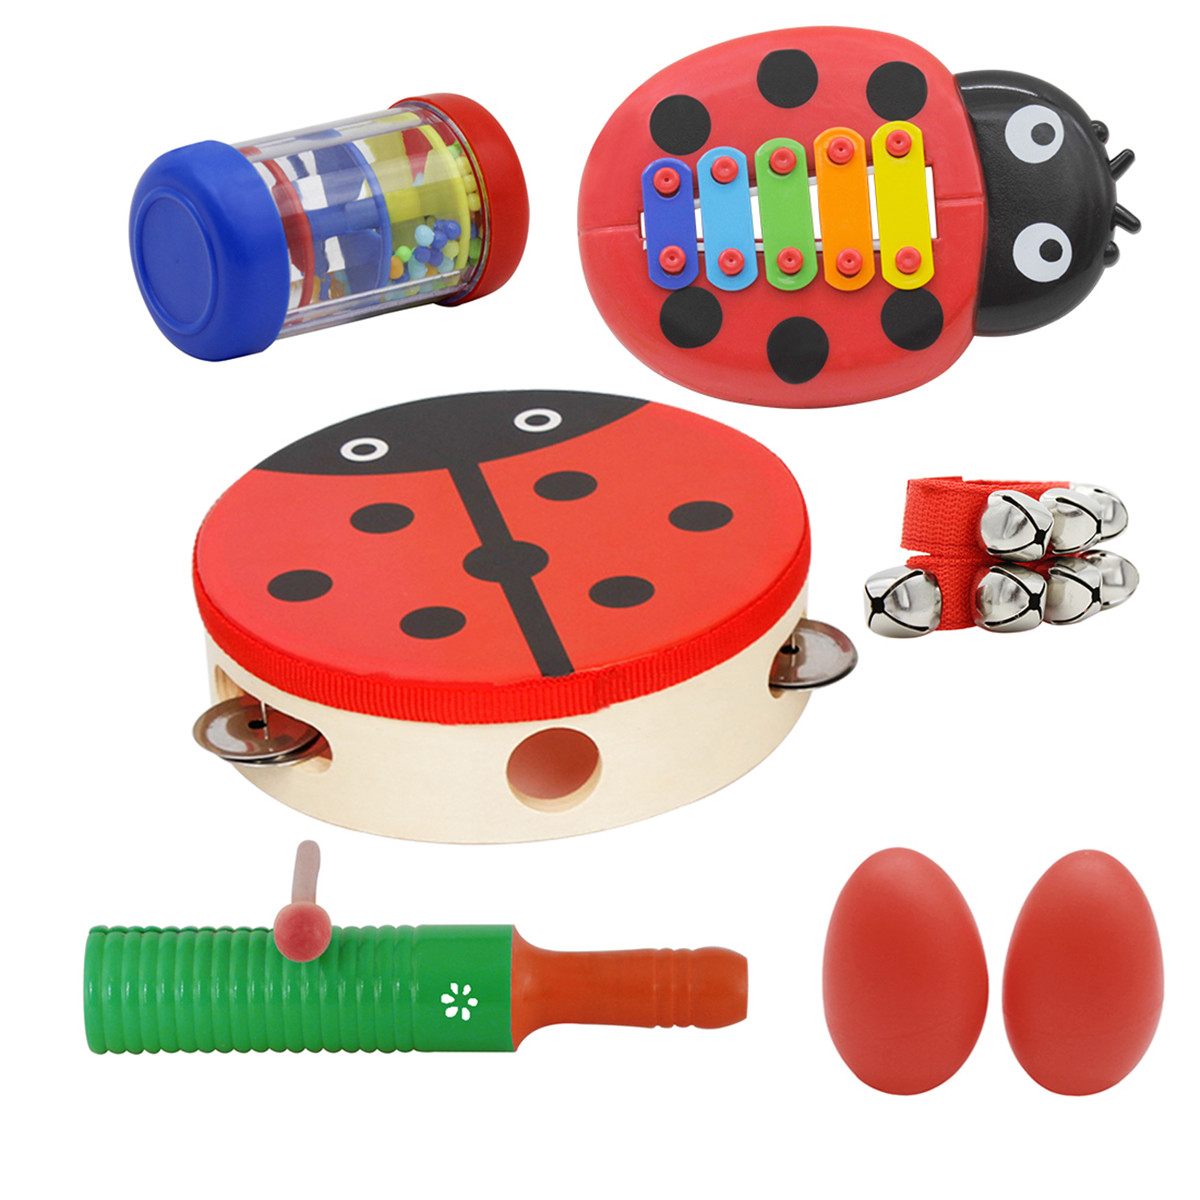 

Orff Musical Instruments Sets Hand Drum Egg Maracas Wrist Bell Single Ring Percussion Piano A Section of Rain Educationa